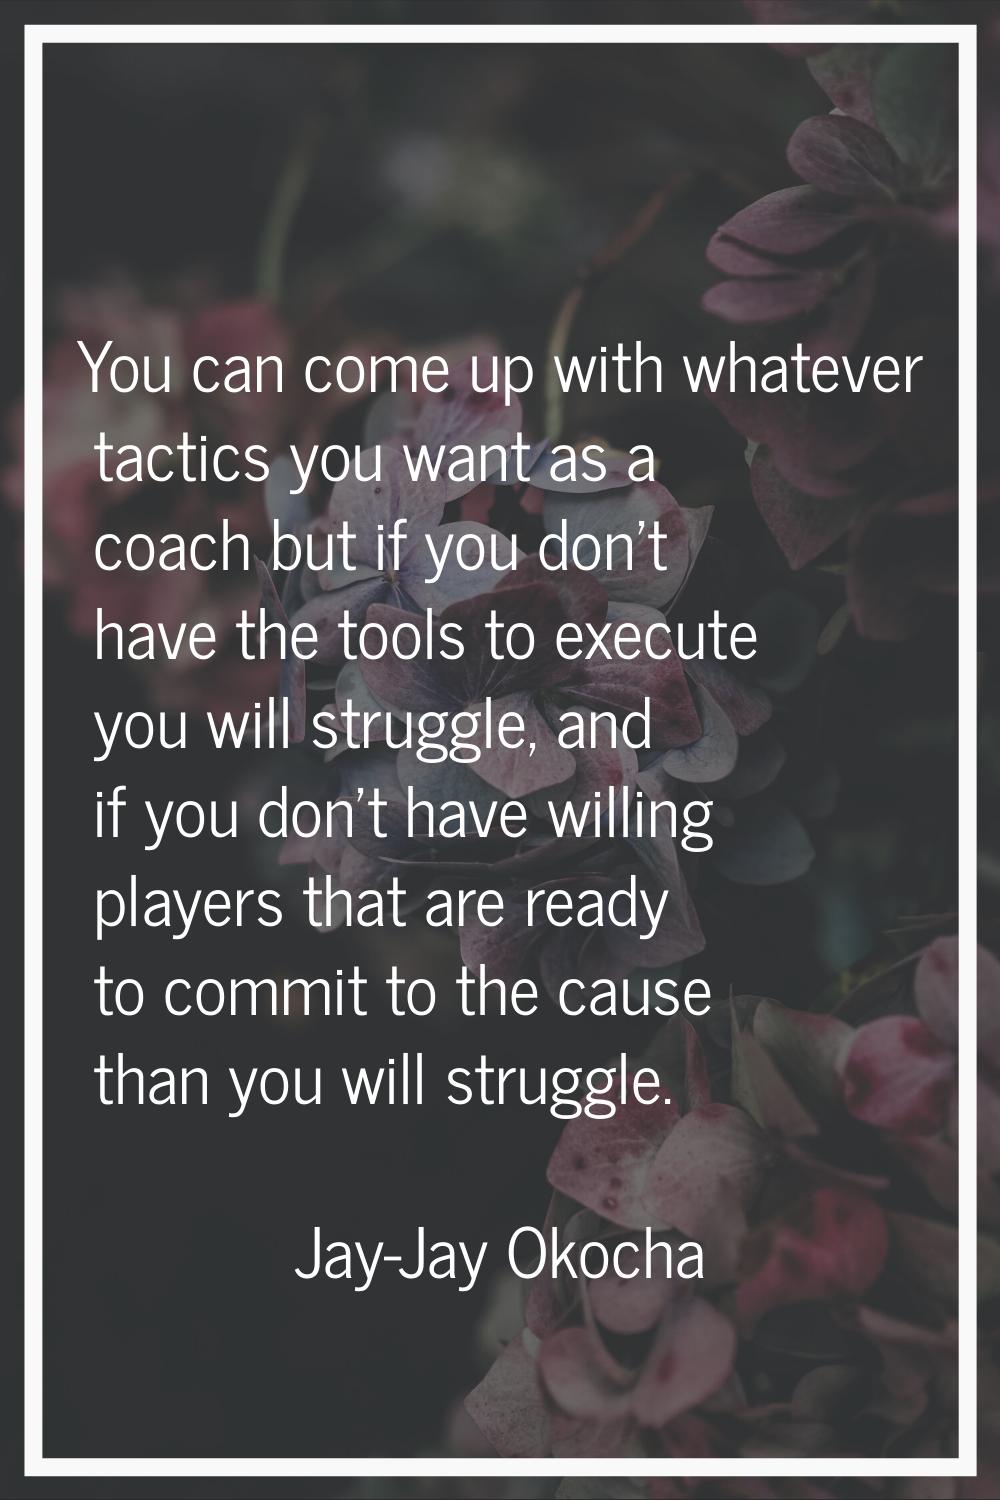 You can come up with whatever tactics you want as a coach but if you don't have the tools to execut